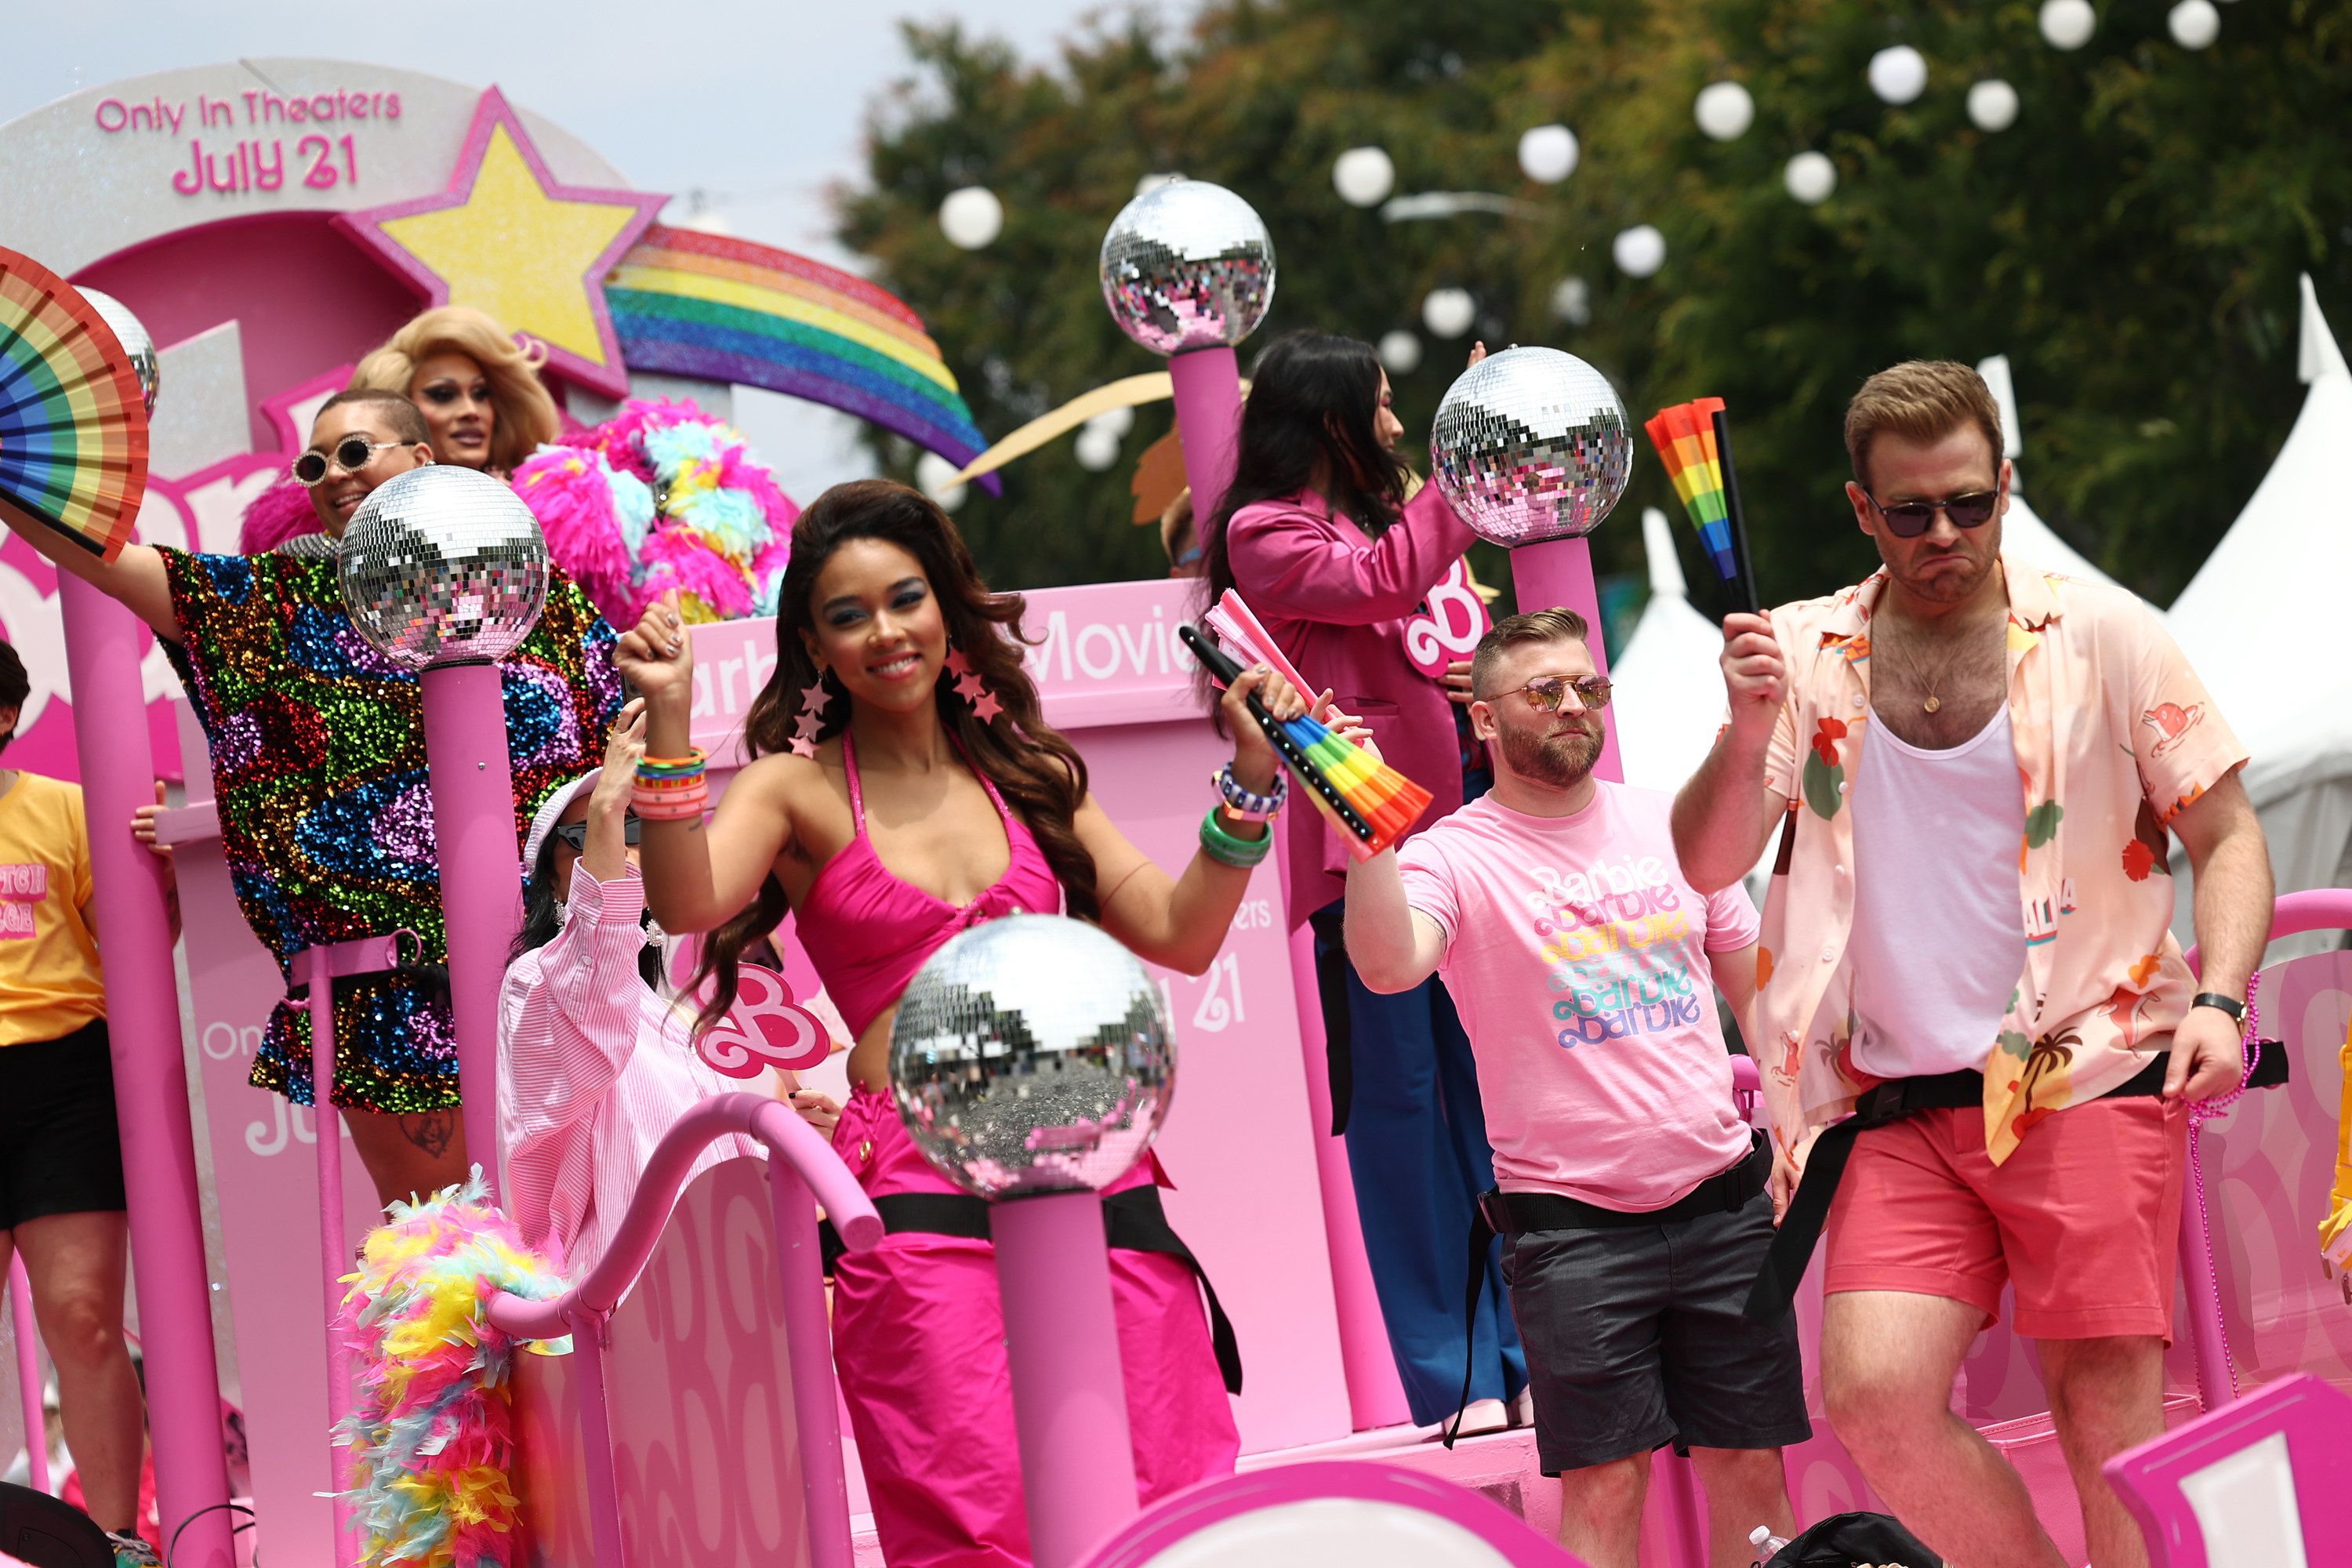 The Barbie float at the Pride parade